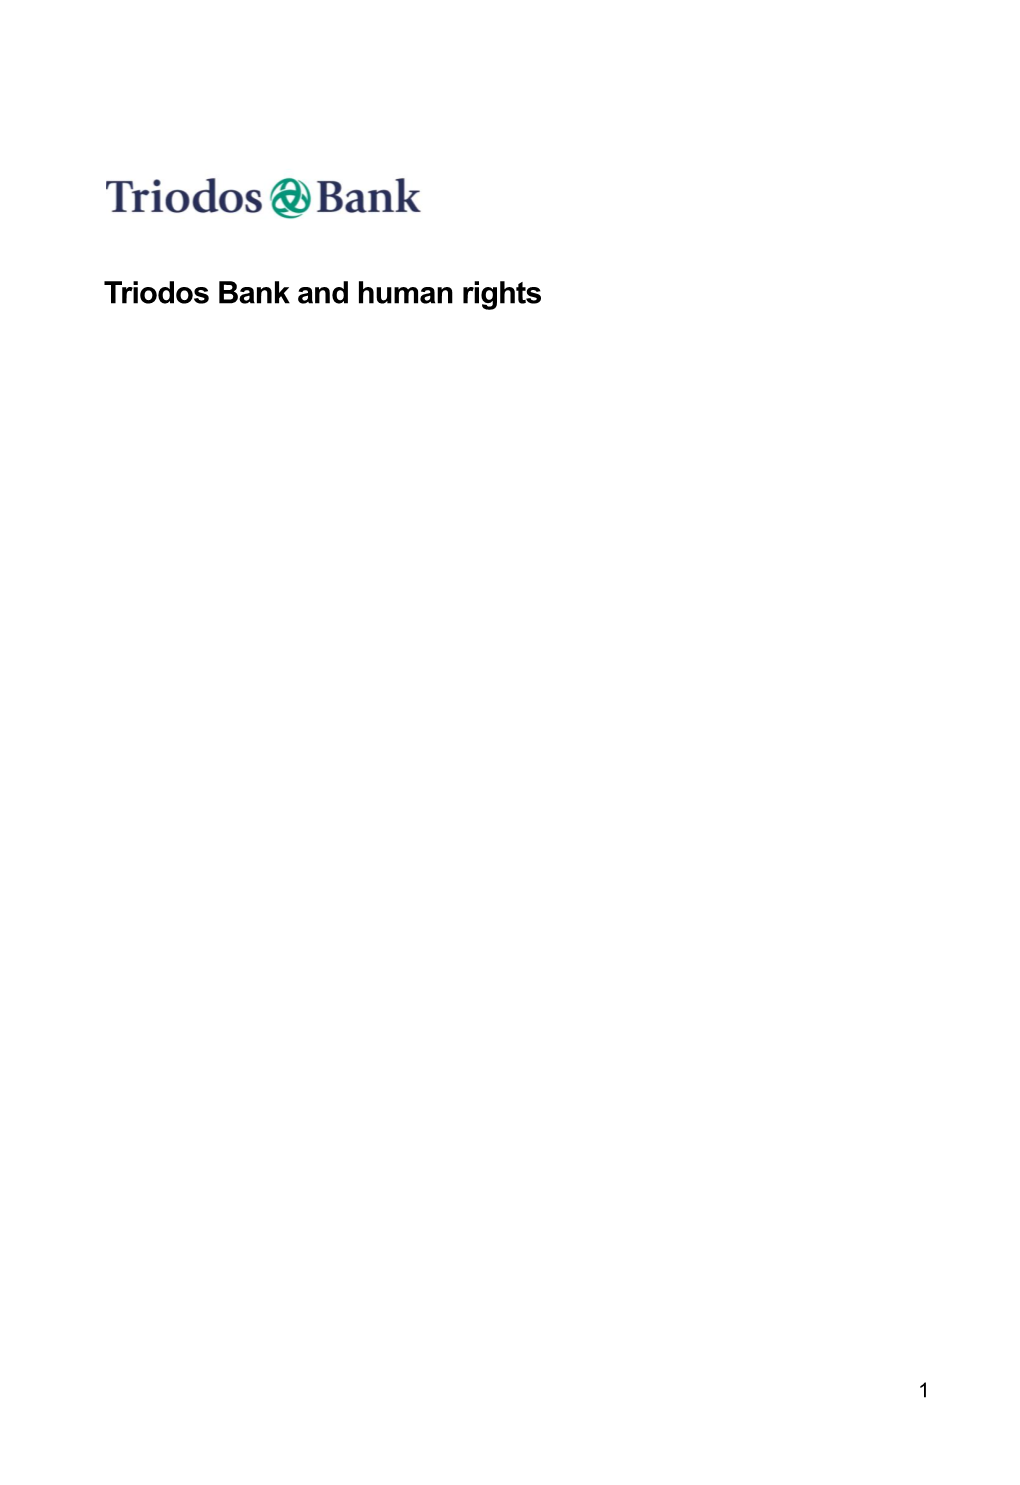 Triodos Bank and Human Rights